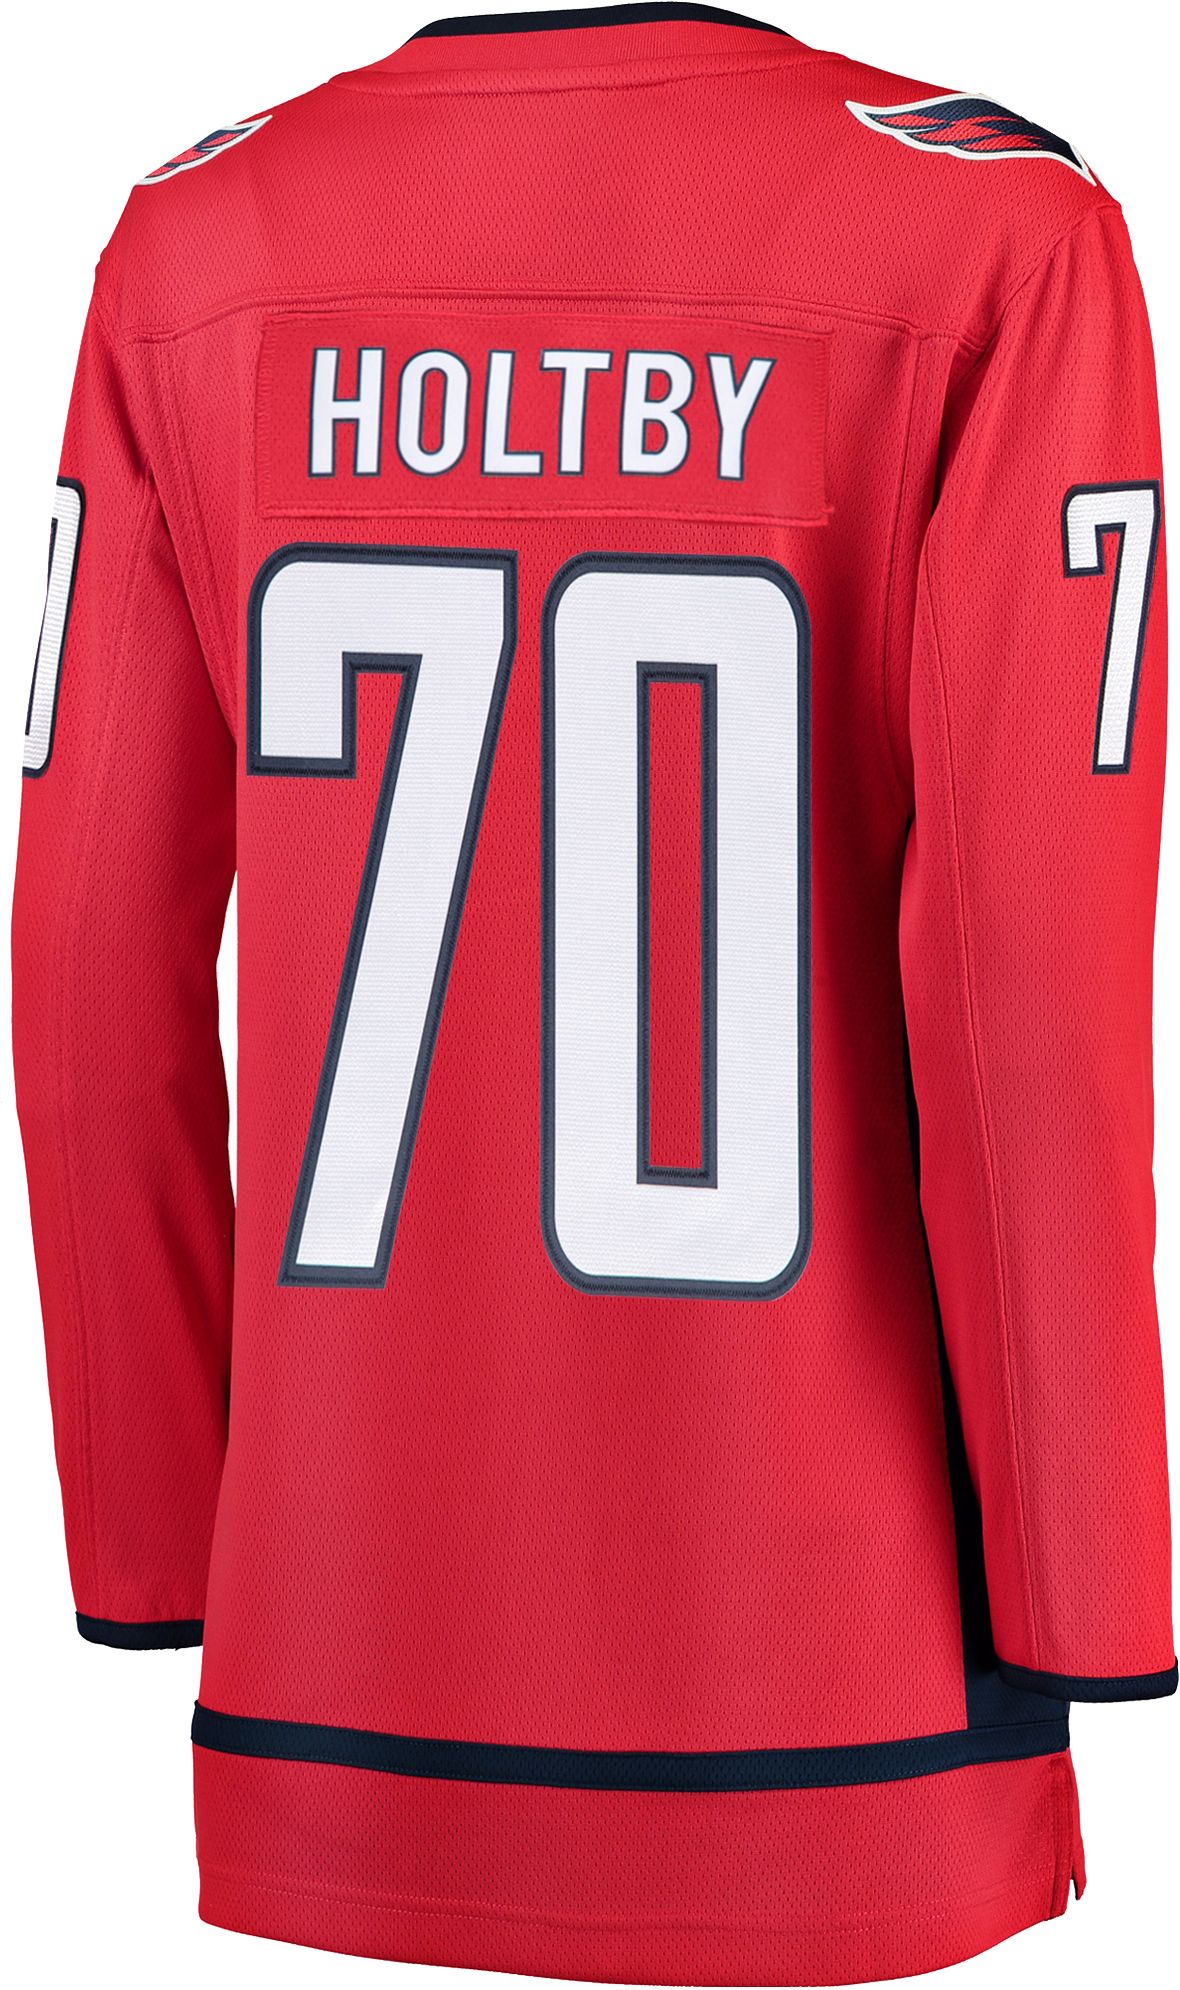 women's holtby jersey